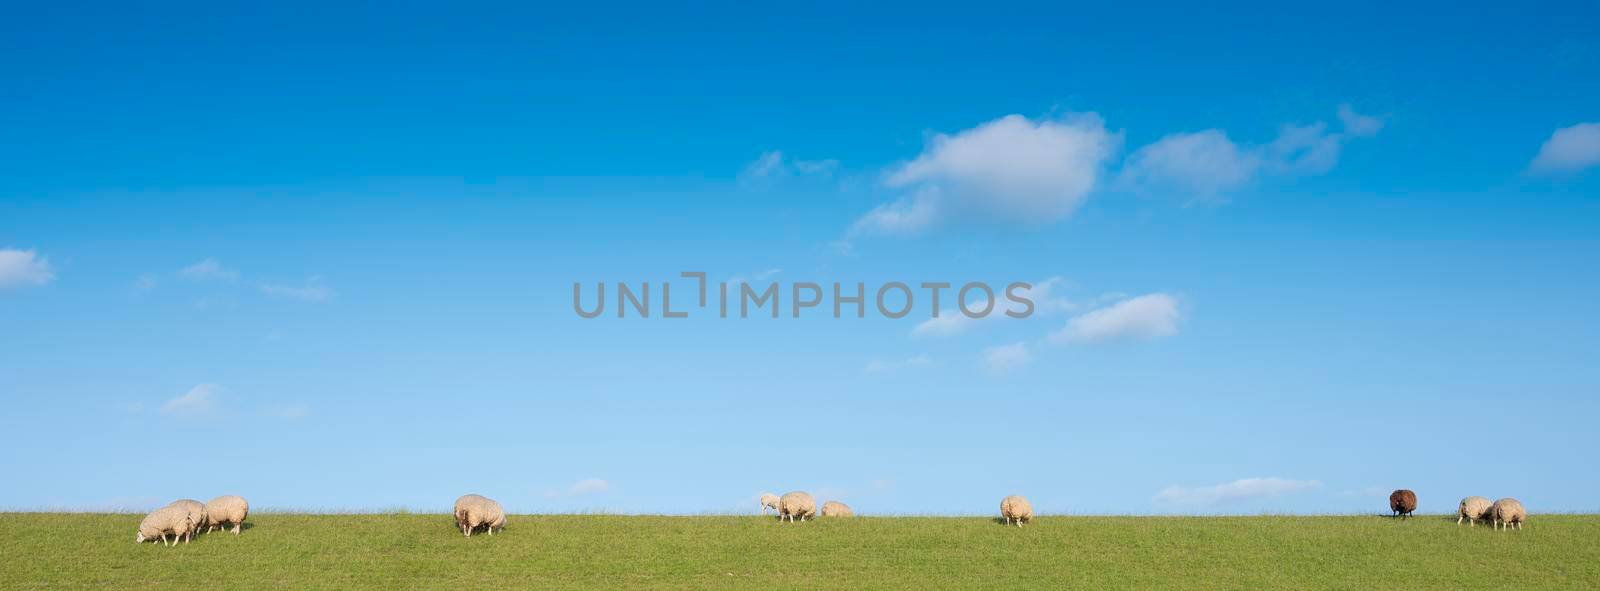 sheep on grass dike under blue sky on island of texel in the netherlands